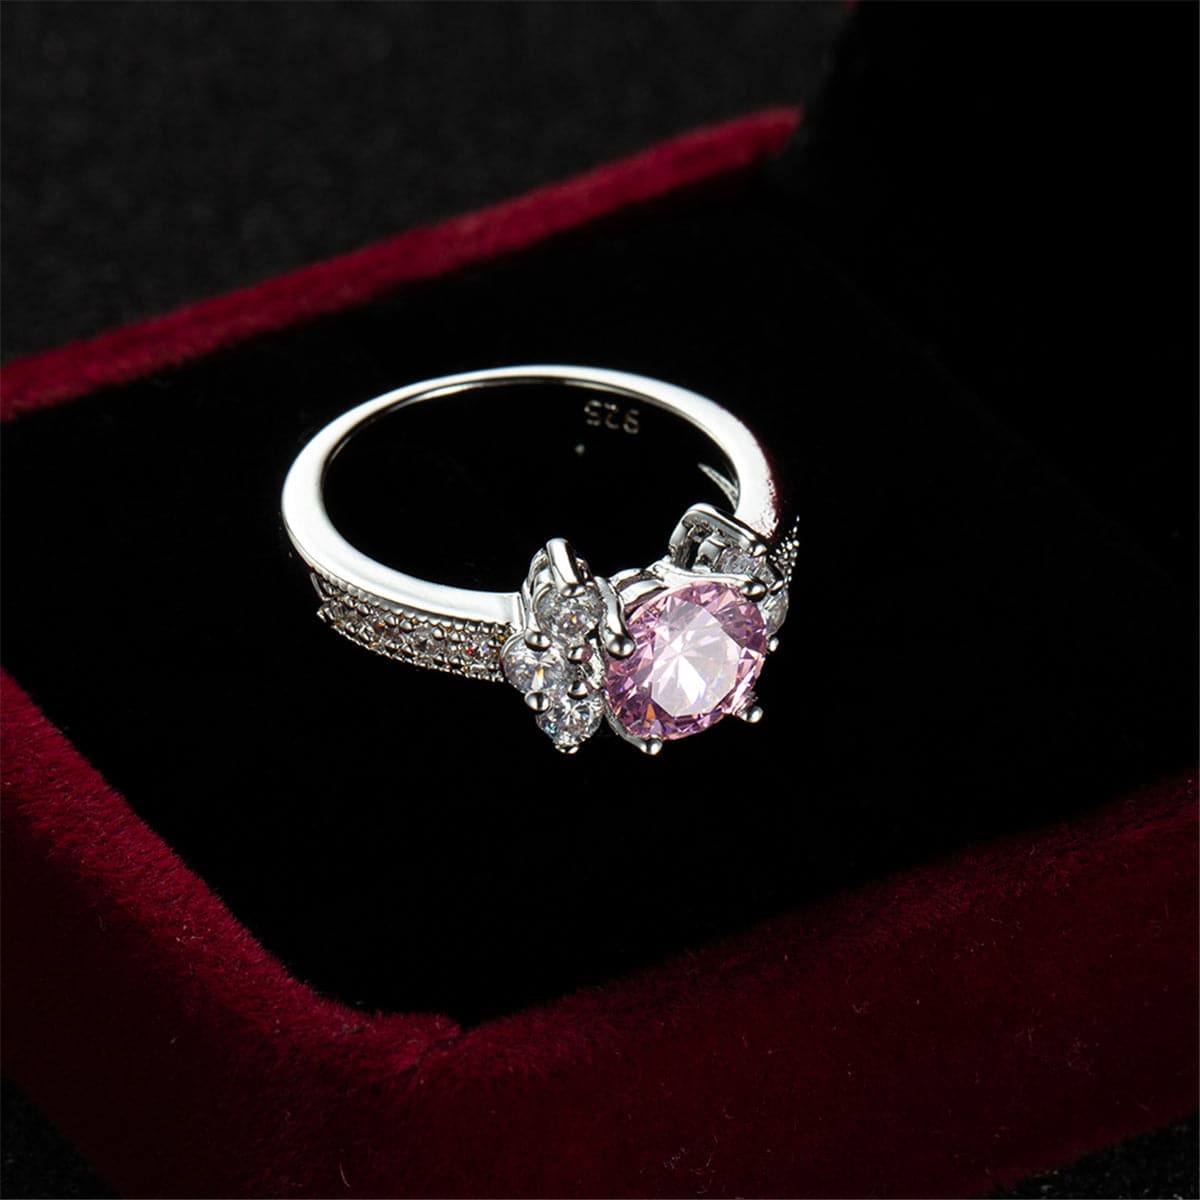 Pink Cubic Zirconia & Crystal Round Cluster-Side Ring